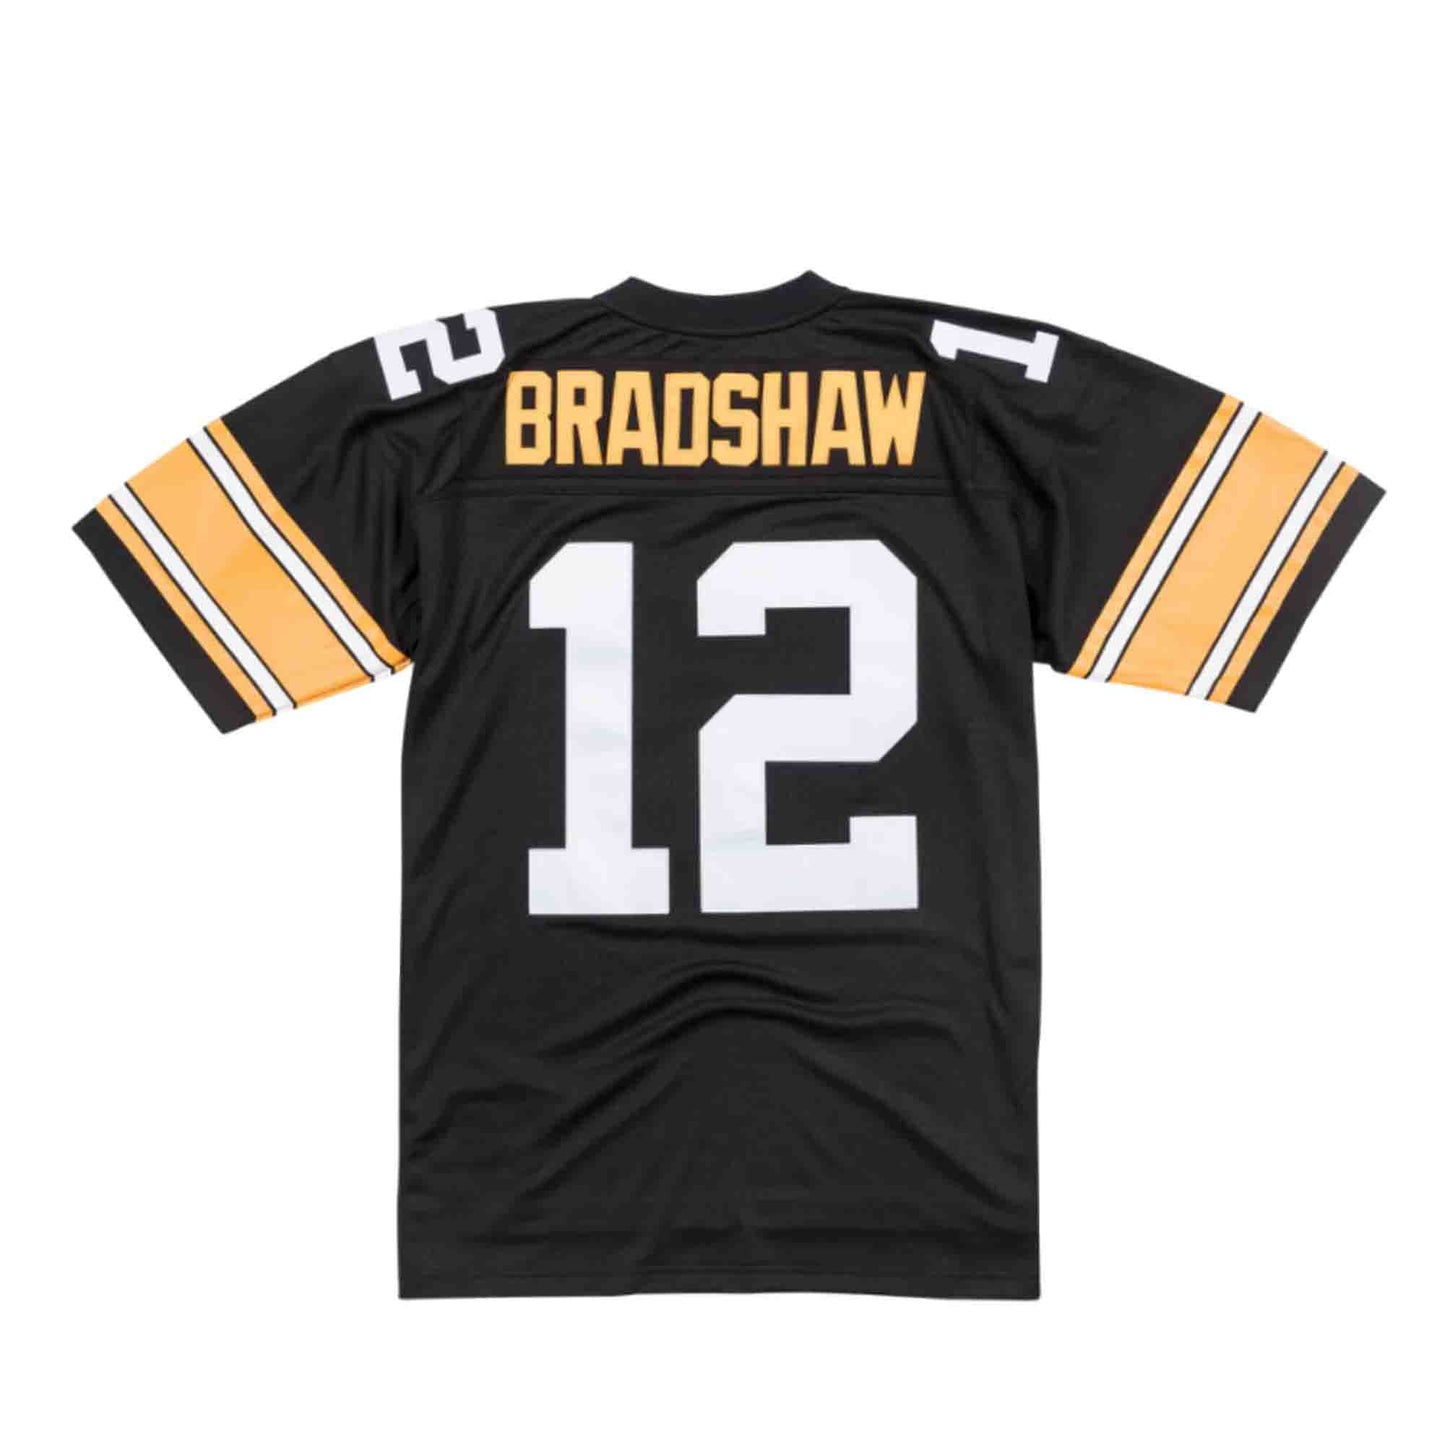 Men's Mitchell & Ness Terry Bradshaw Black/Gold Pittsburgh Steelers 1976 Split Legacy Replica Jersey Size: Extra Large